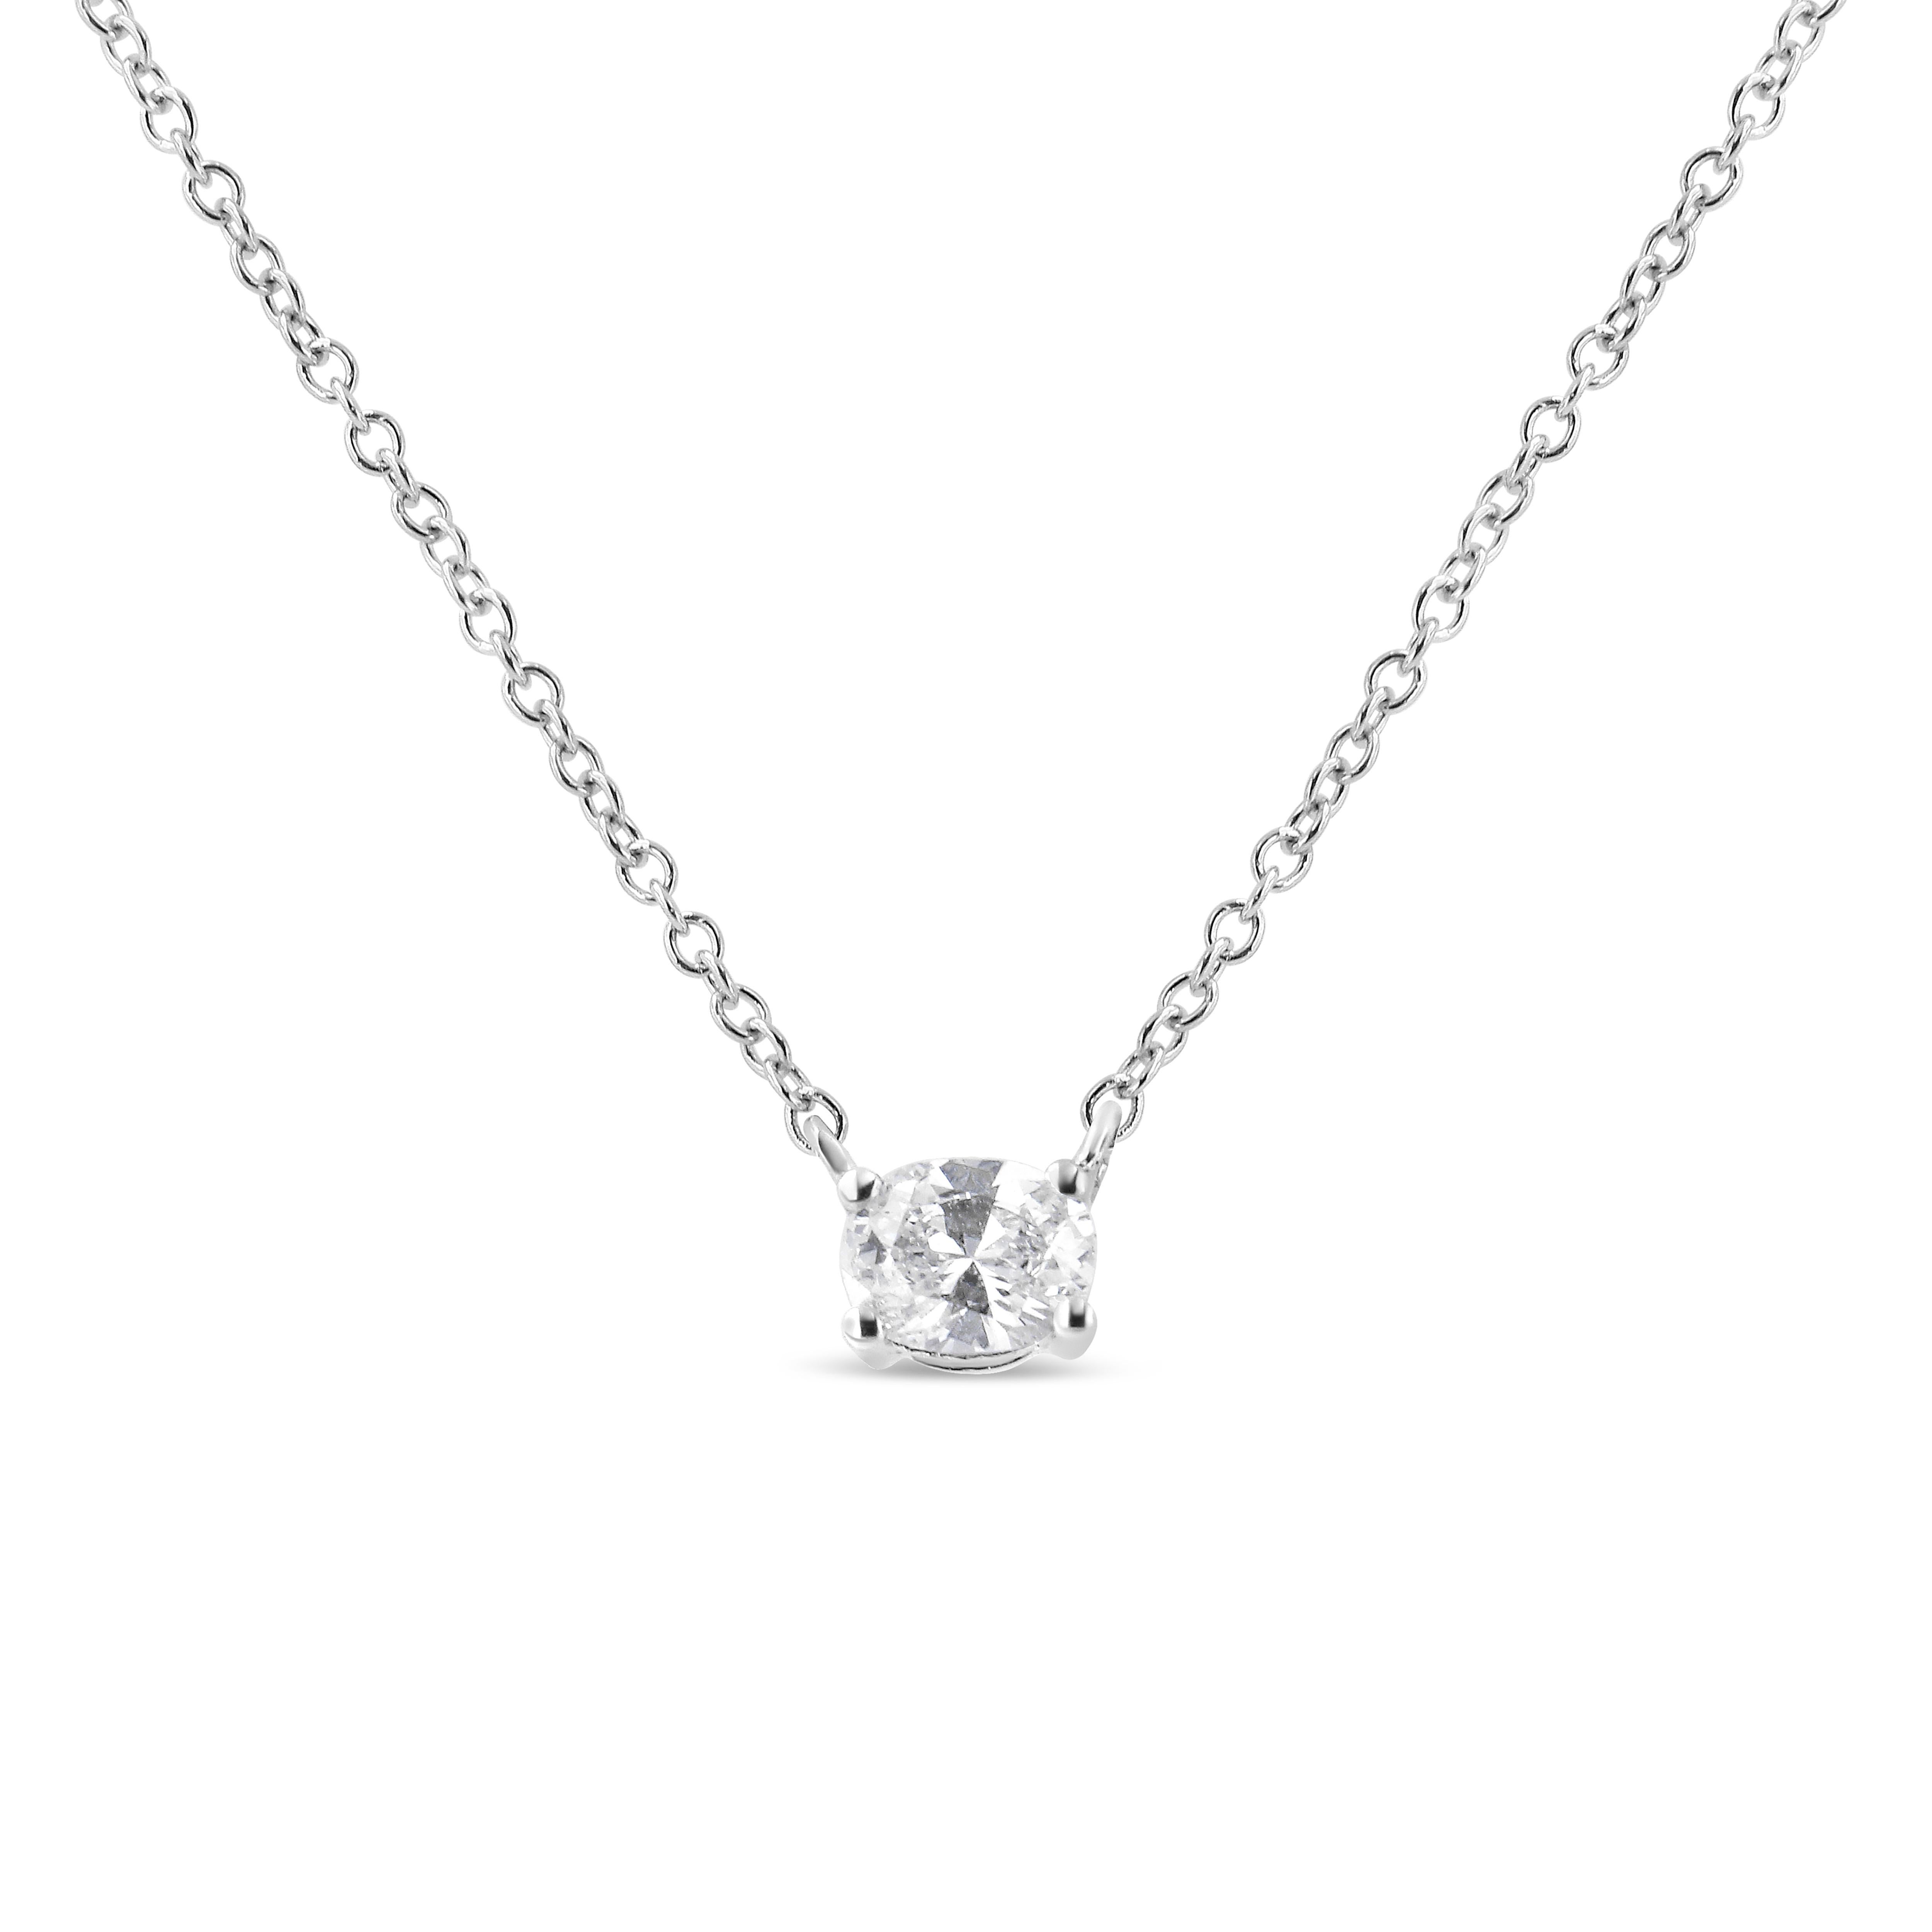 Elevate your everyday look with this stunning 1/5 cttw diamond pendant. This beautiful necklace is crafted in 14k white gold, a metal that will stay tarnish free for years to come. The diamond is oval and embellished in a classic 4-prong setting. It